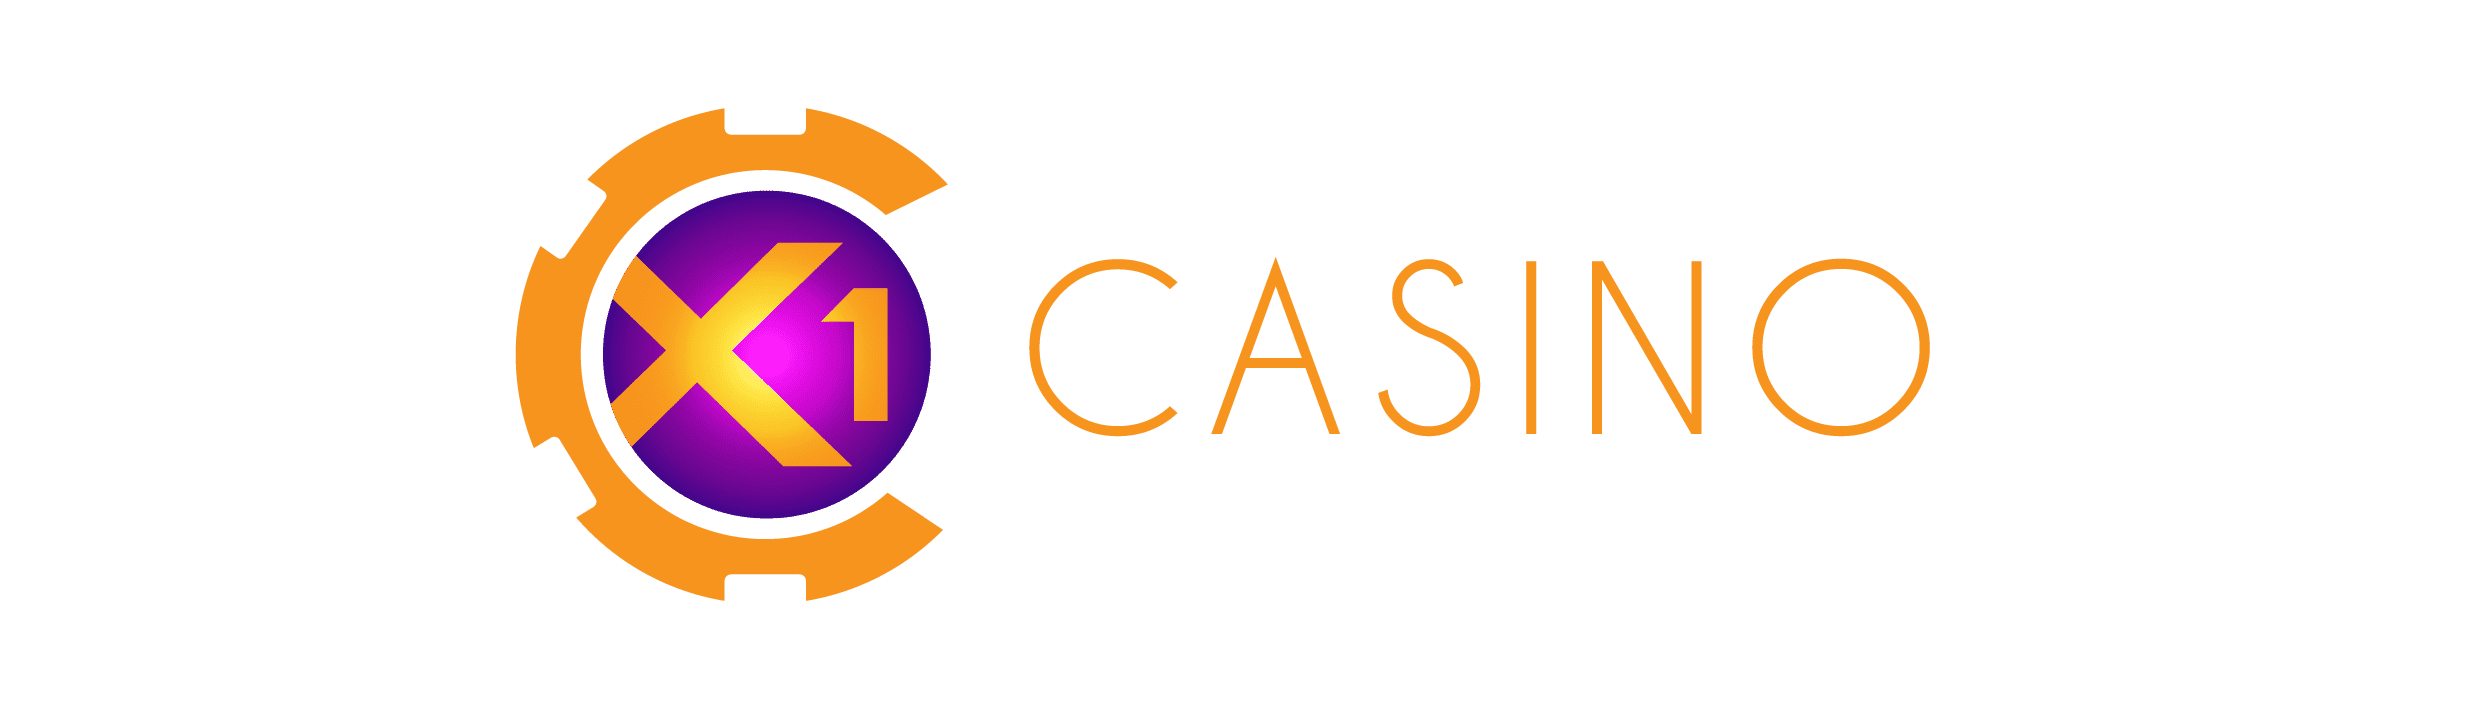 X1 Casino Review